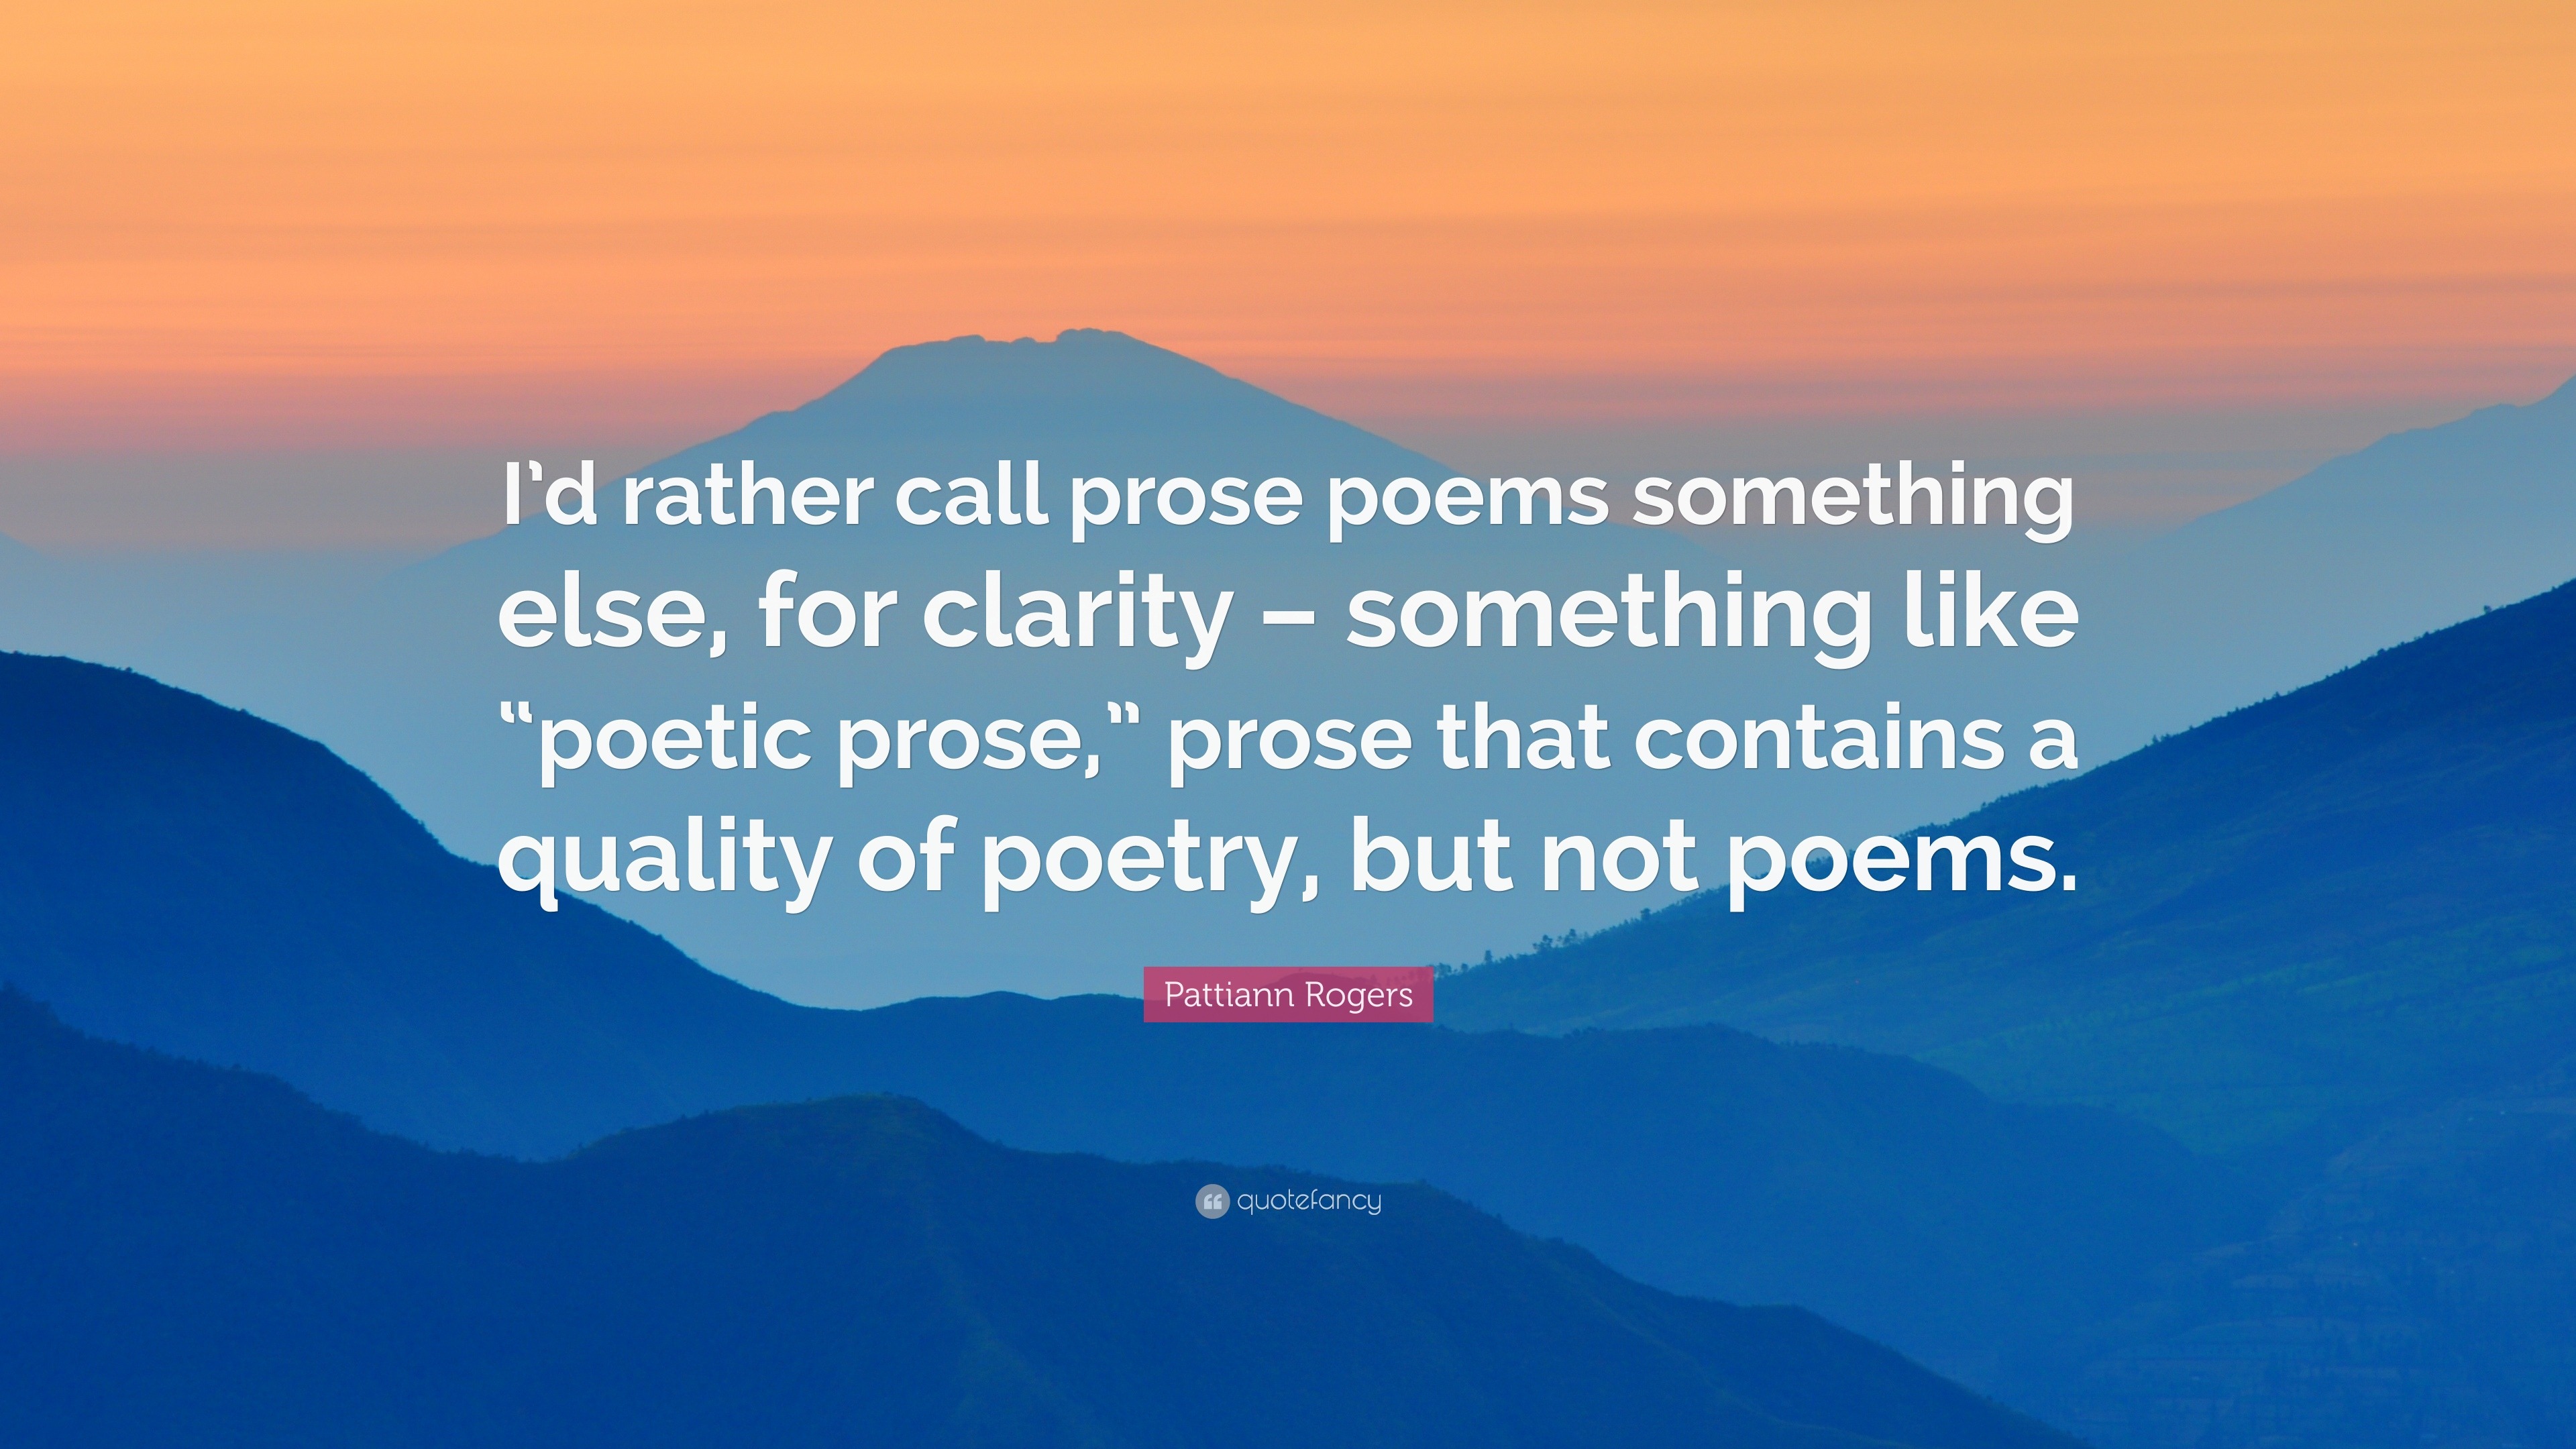 Pattiann Rogers Quote: “I’d rather call prose poems something else, for ...